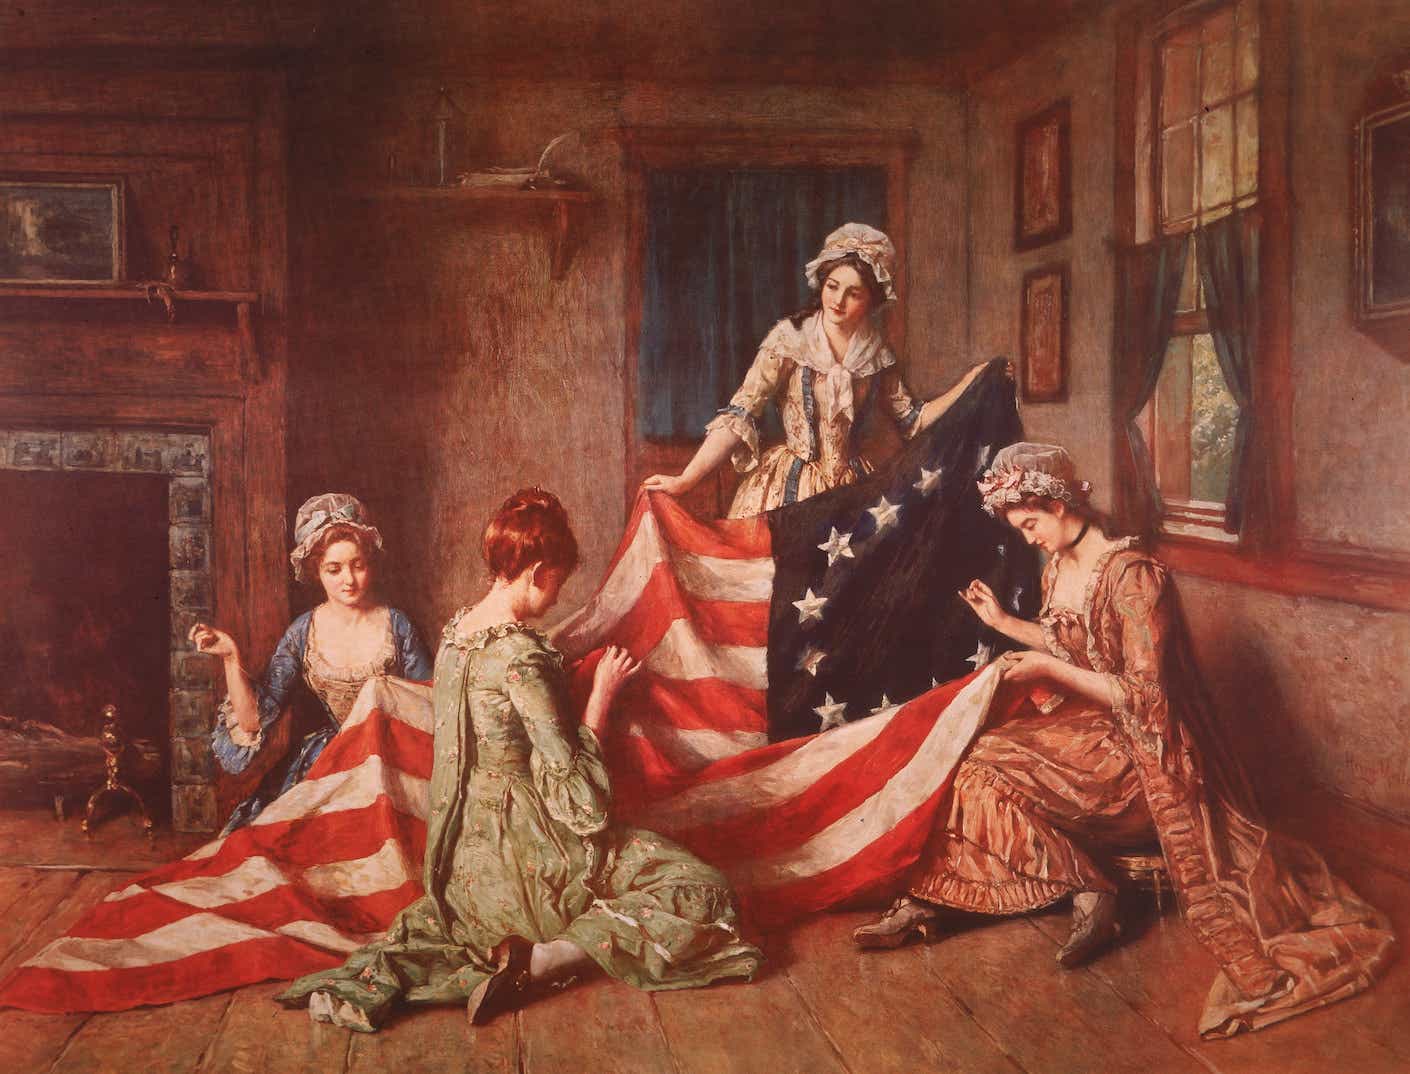 Betsy Ross and her assistants sewing the first American flag